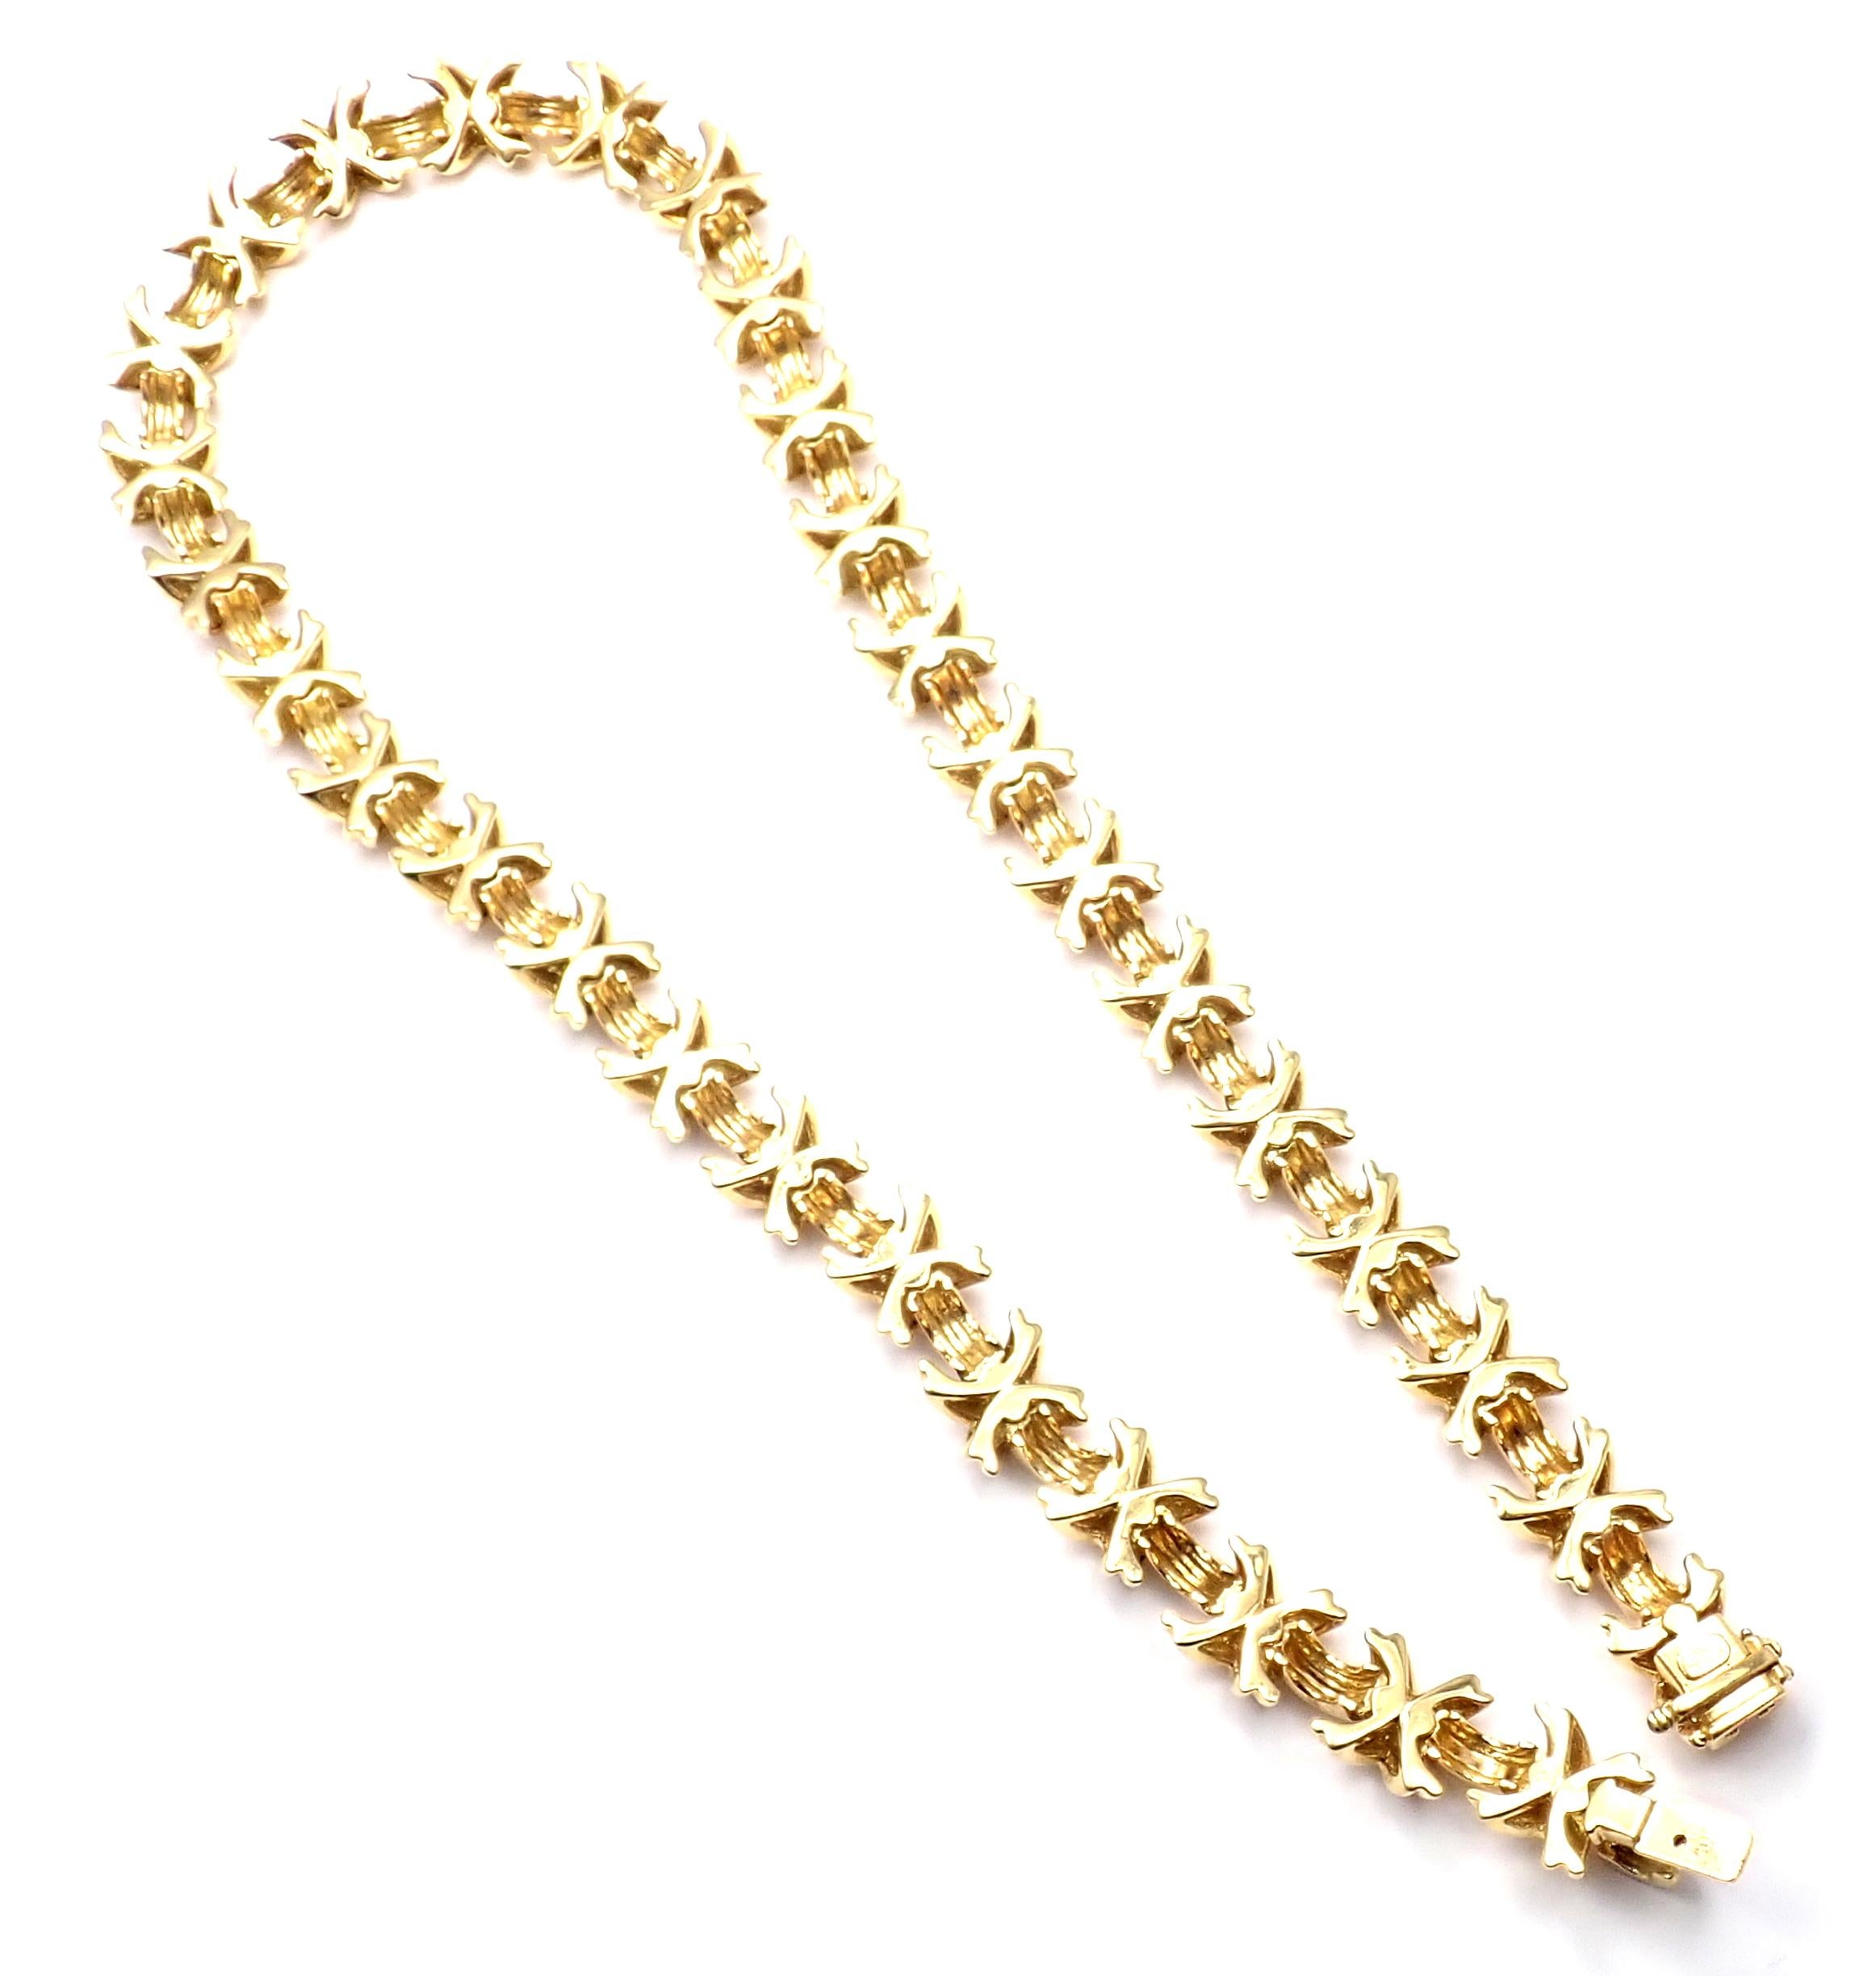 Women's or Men's Tiffany & Co. Signature X Link Yellow Gold Necklace